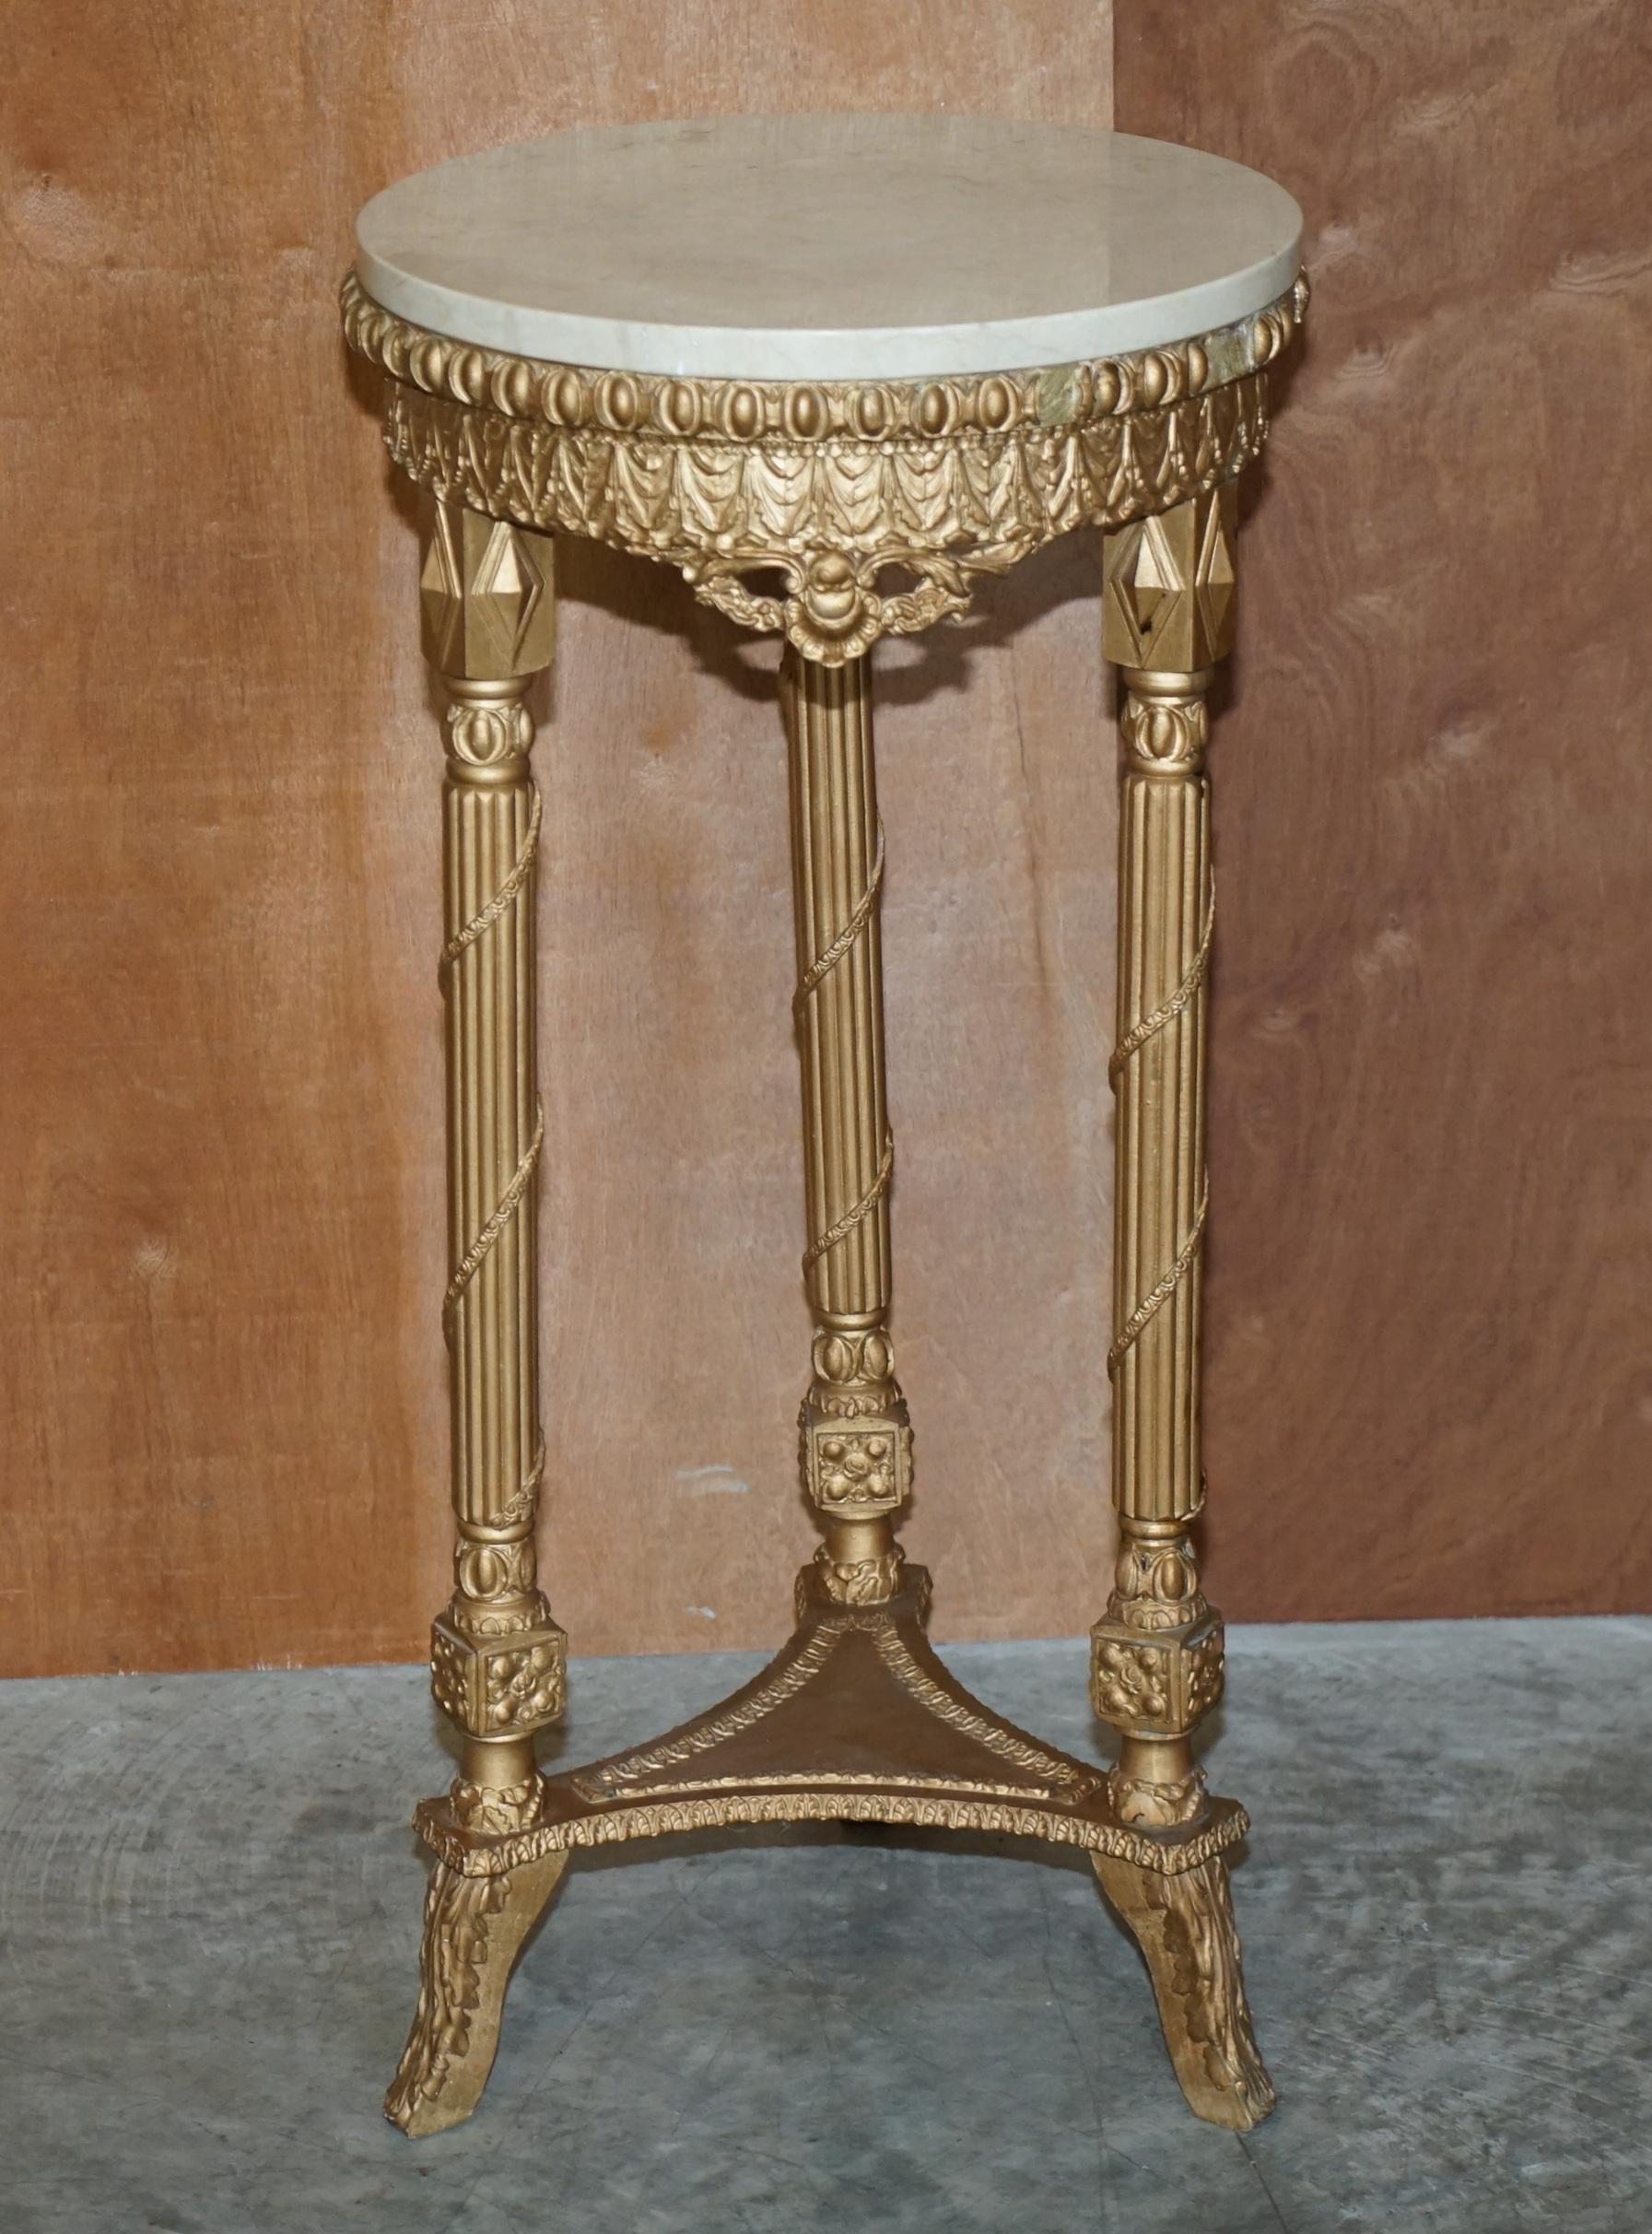 We are delighted to offer for sale this lovely pair of antique Giltwood marble topped jardiniere stands

A very good looking well made and decorative pair, made for plants and displaying antiques but considered art furniture in their own right